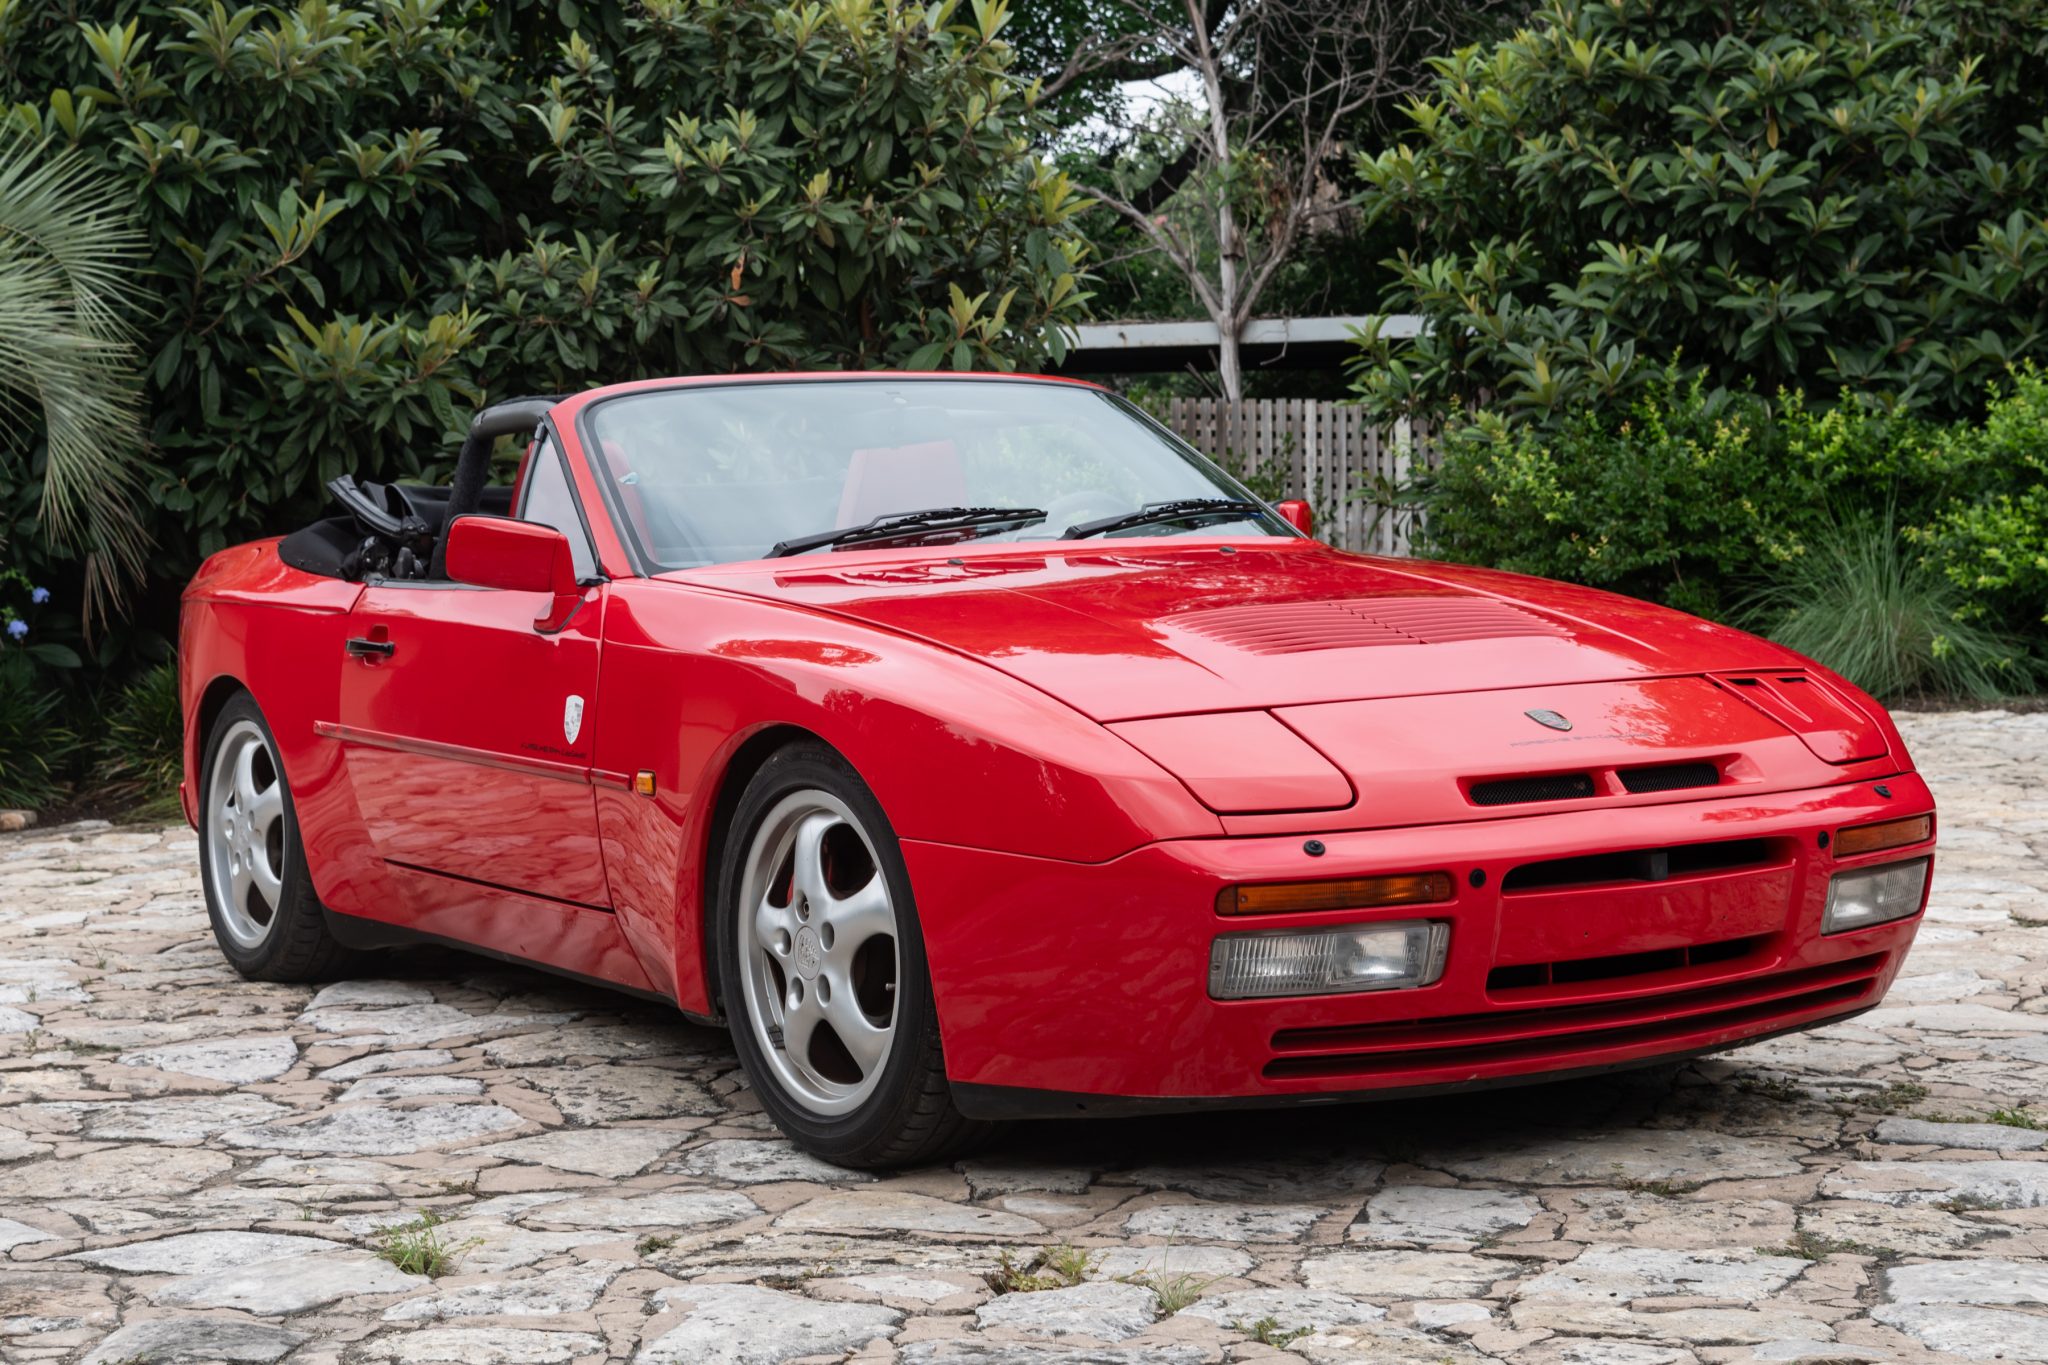 Used RoW 1991 Porsche 944 Turbo Cabriolet Review